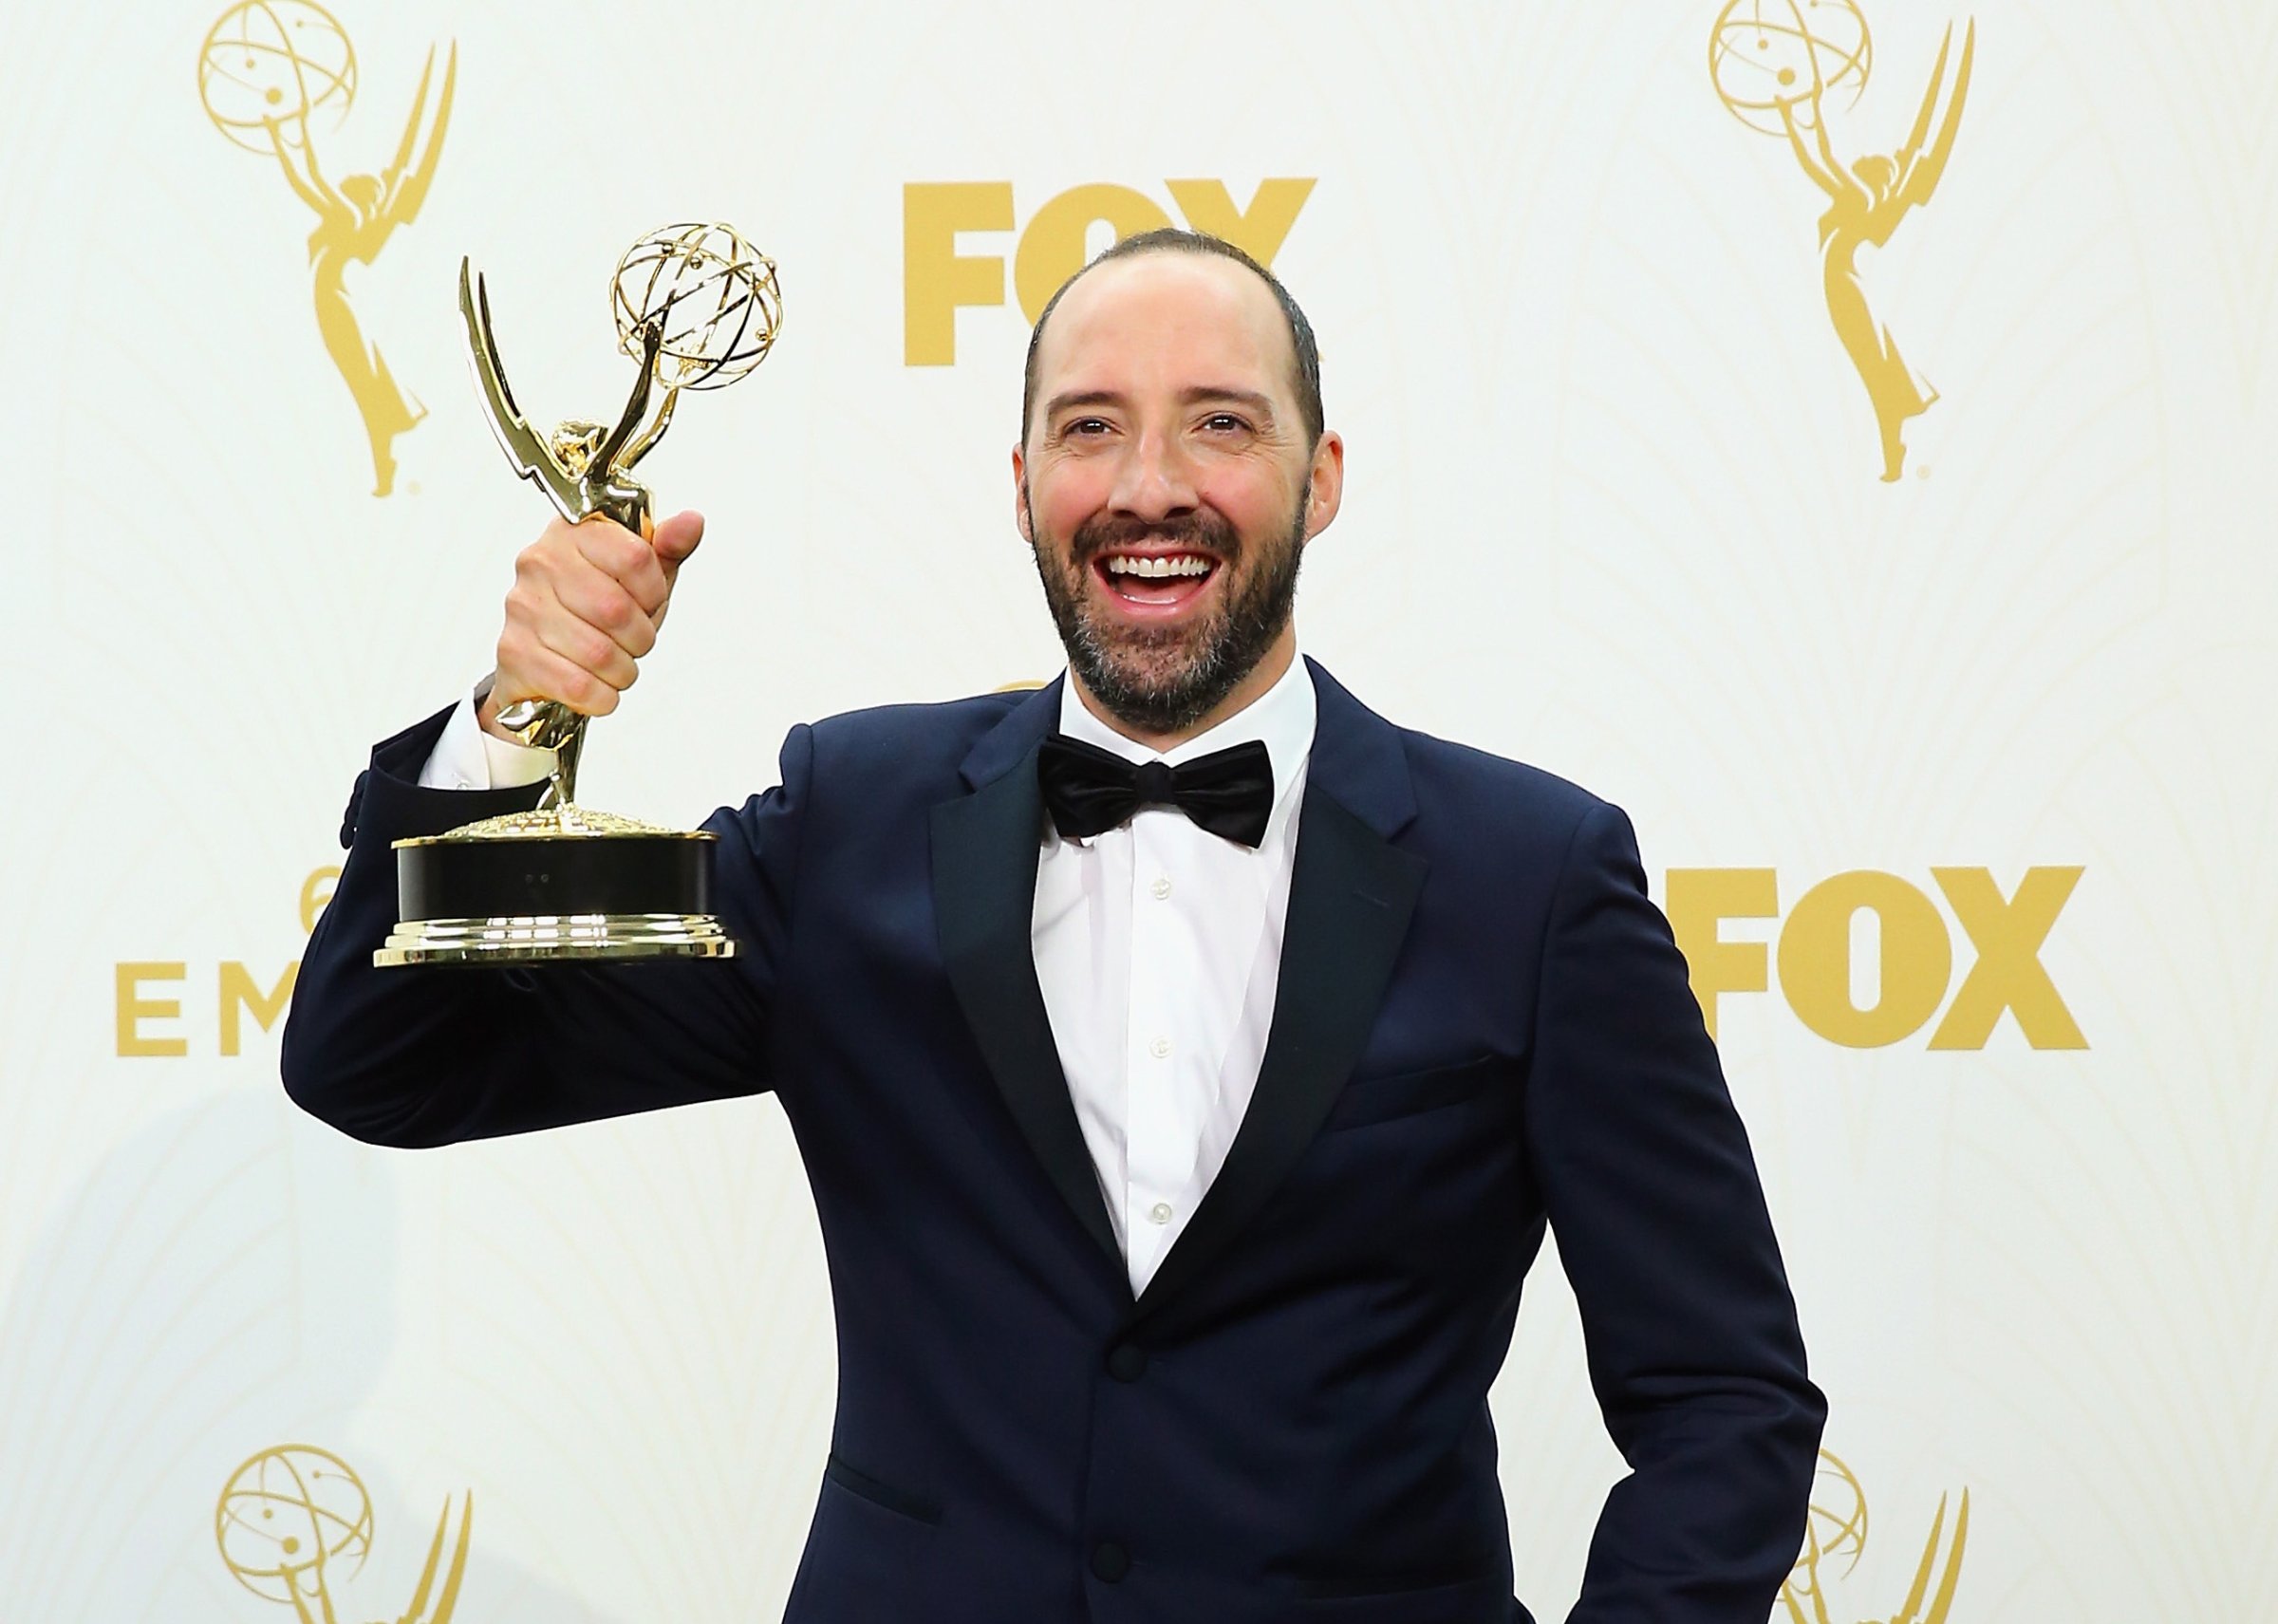 Tony Hale, winner of the award for Outstanding Supporting Actor in a Comedy Series for 'Veep', poses in the press room at the 67th Annual Primetime Emmy Awards at Microsoft Theater in Los Angeles on September 20, 2015.